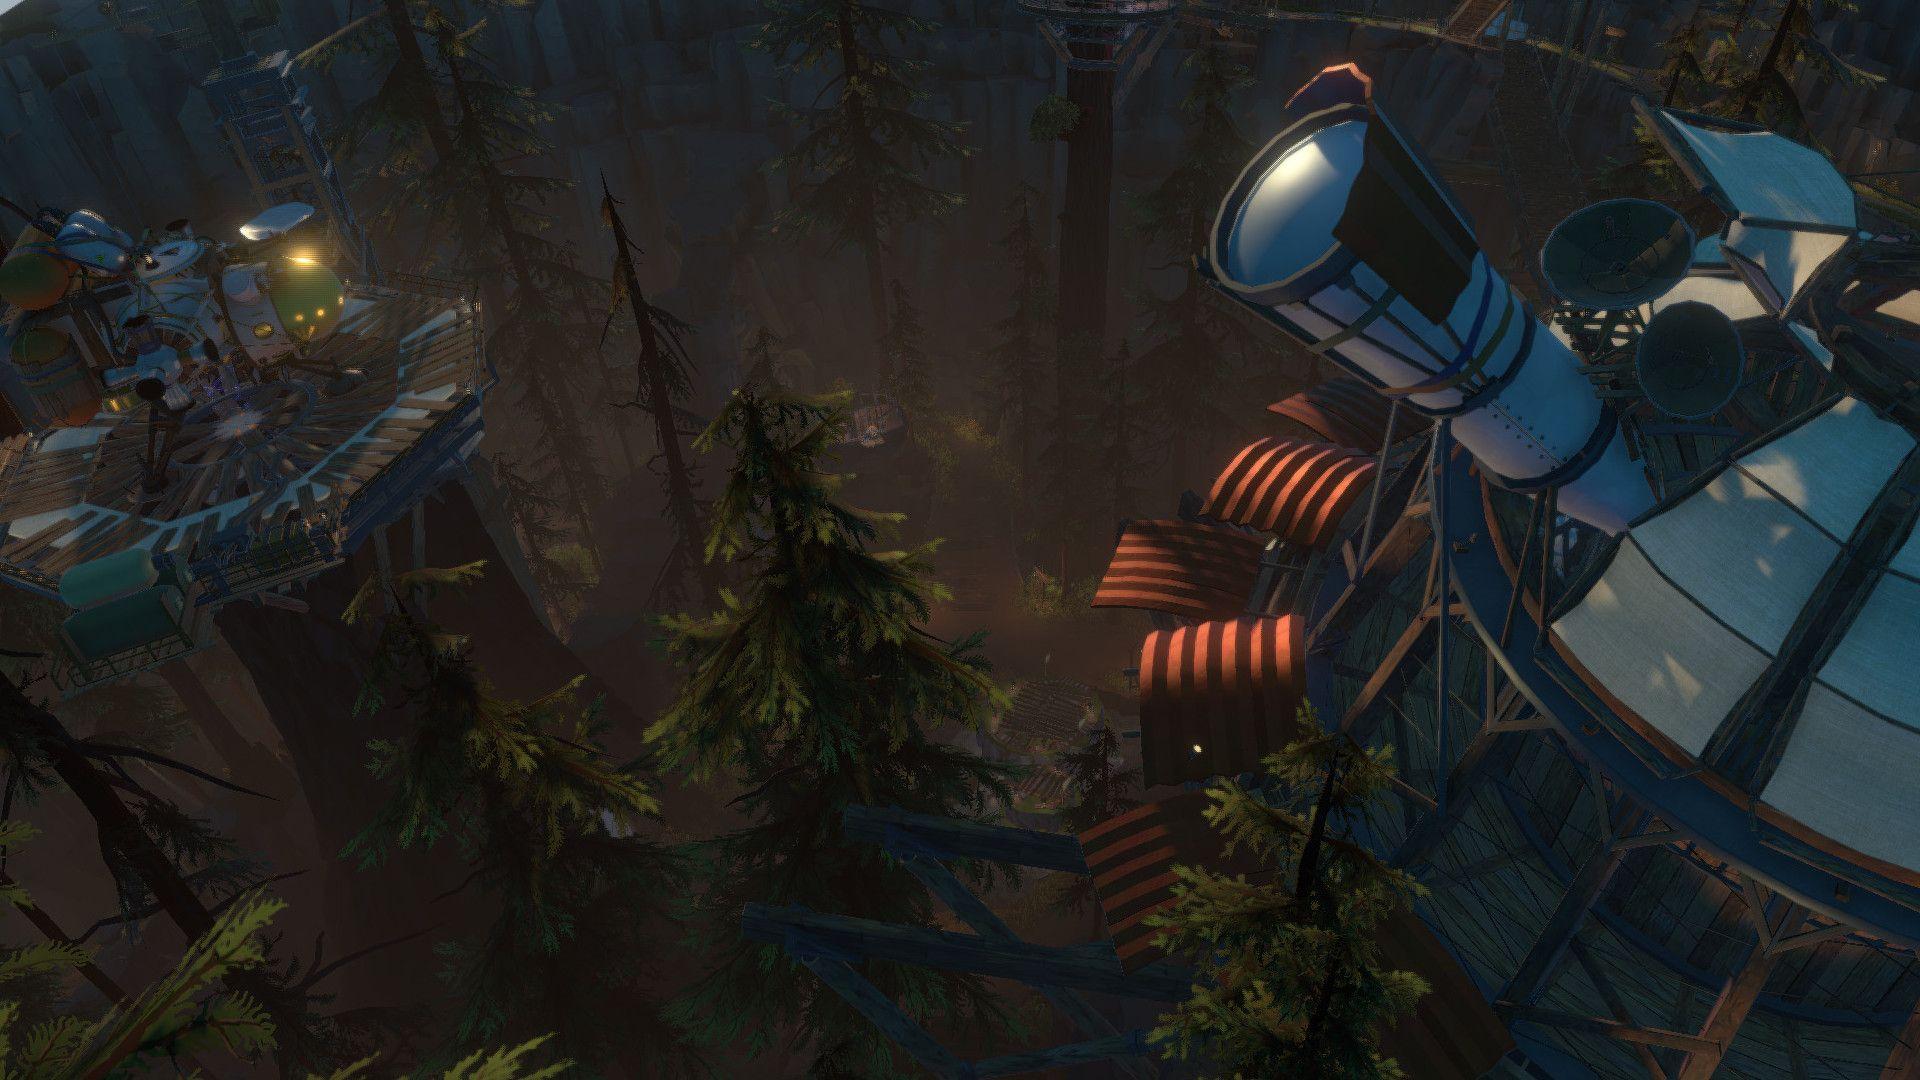 The Outer Wilds Upcoming Mystery Game Delayed Until 2019